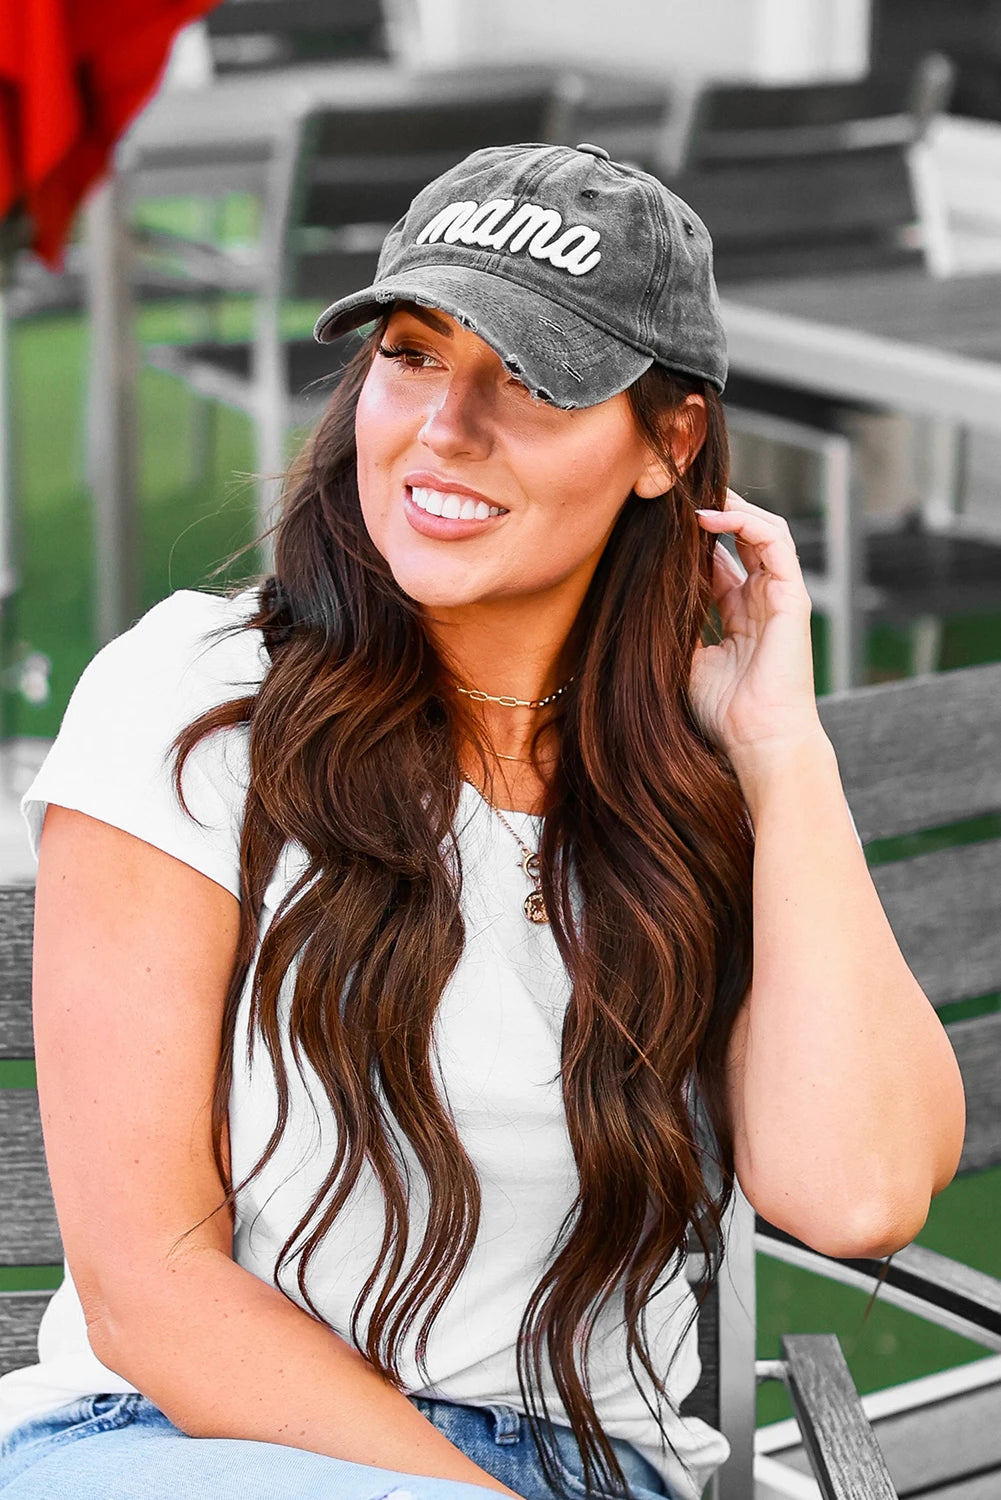 Mama Embroidered Ponytail Cap